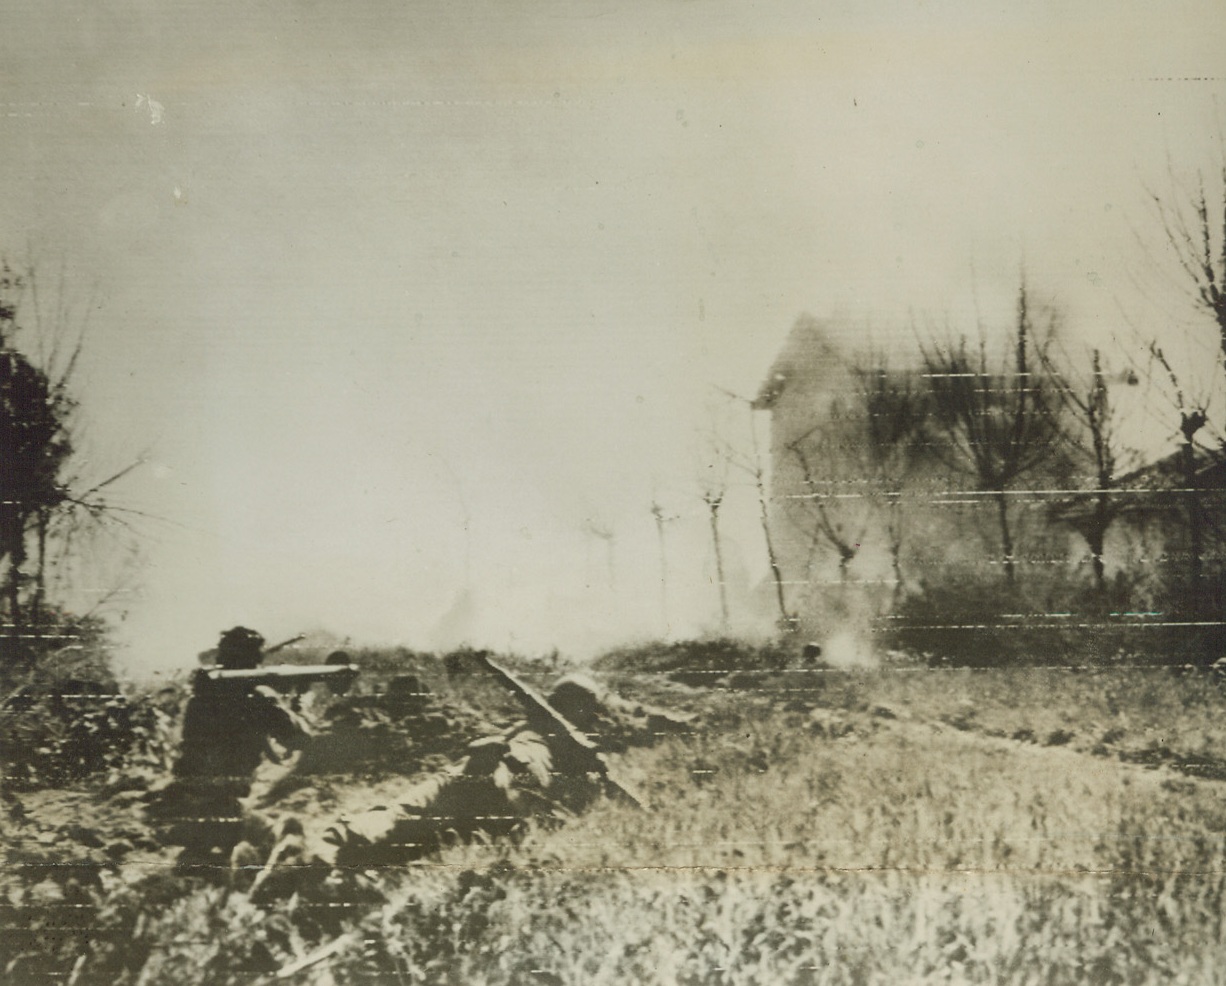 BAZOOKA “MUSIC” FOR NAZIS, 4/19/1944. ITALY—Allied Infantrymen, (left), use a bazooka to blast Germans from this farmhouse (right, background), along the Anzio front. The weapon, (on shoulder of man at far left), has just fired a shell which can be seen exploding to the left of the house.Credit: U.S. Signal Corps Radiotelephoto;